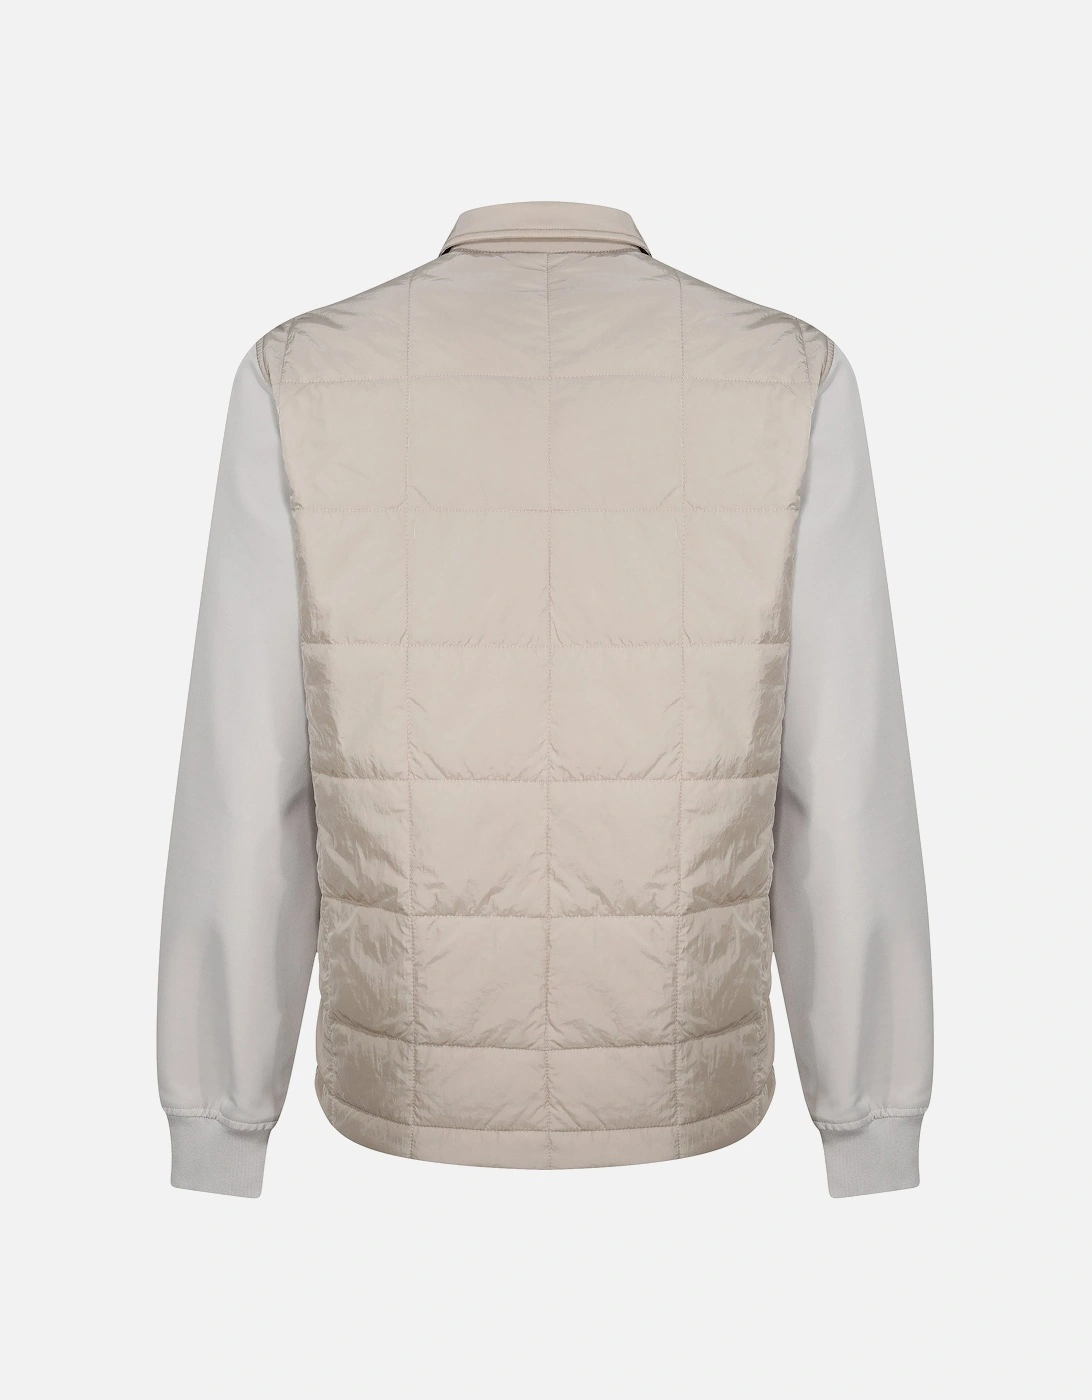 Los Amigos Soft Shell Quilted Mens Nylon Jacket - Pumice